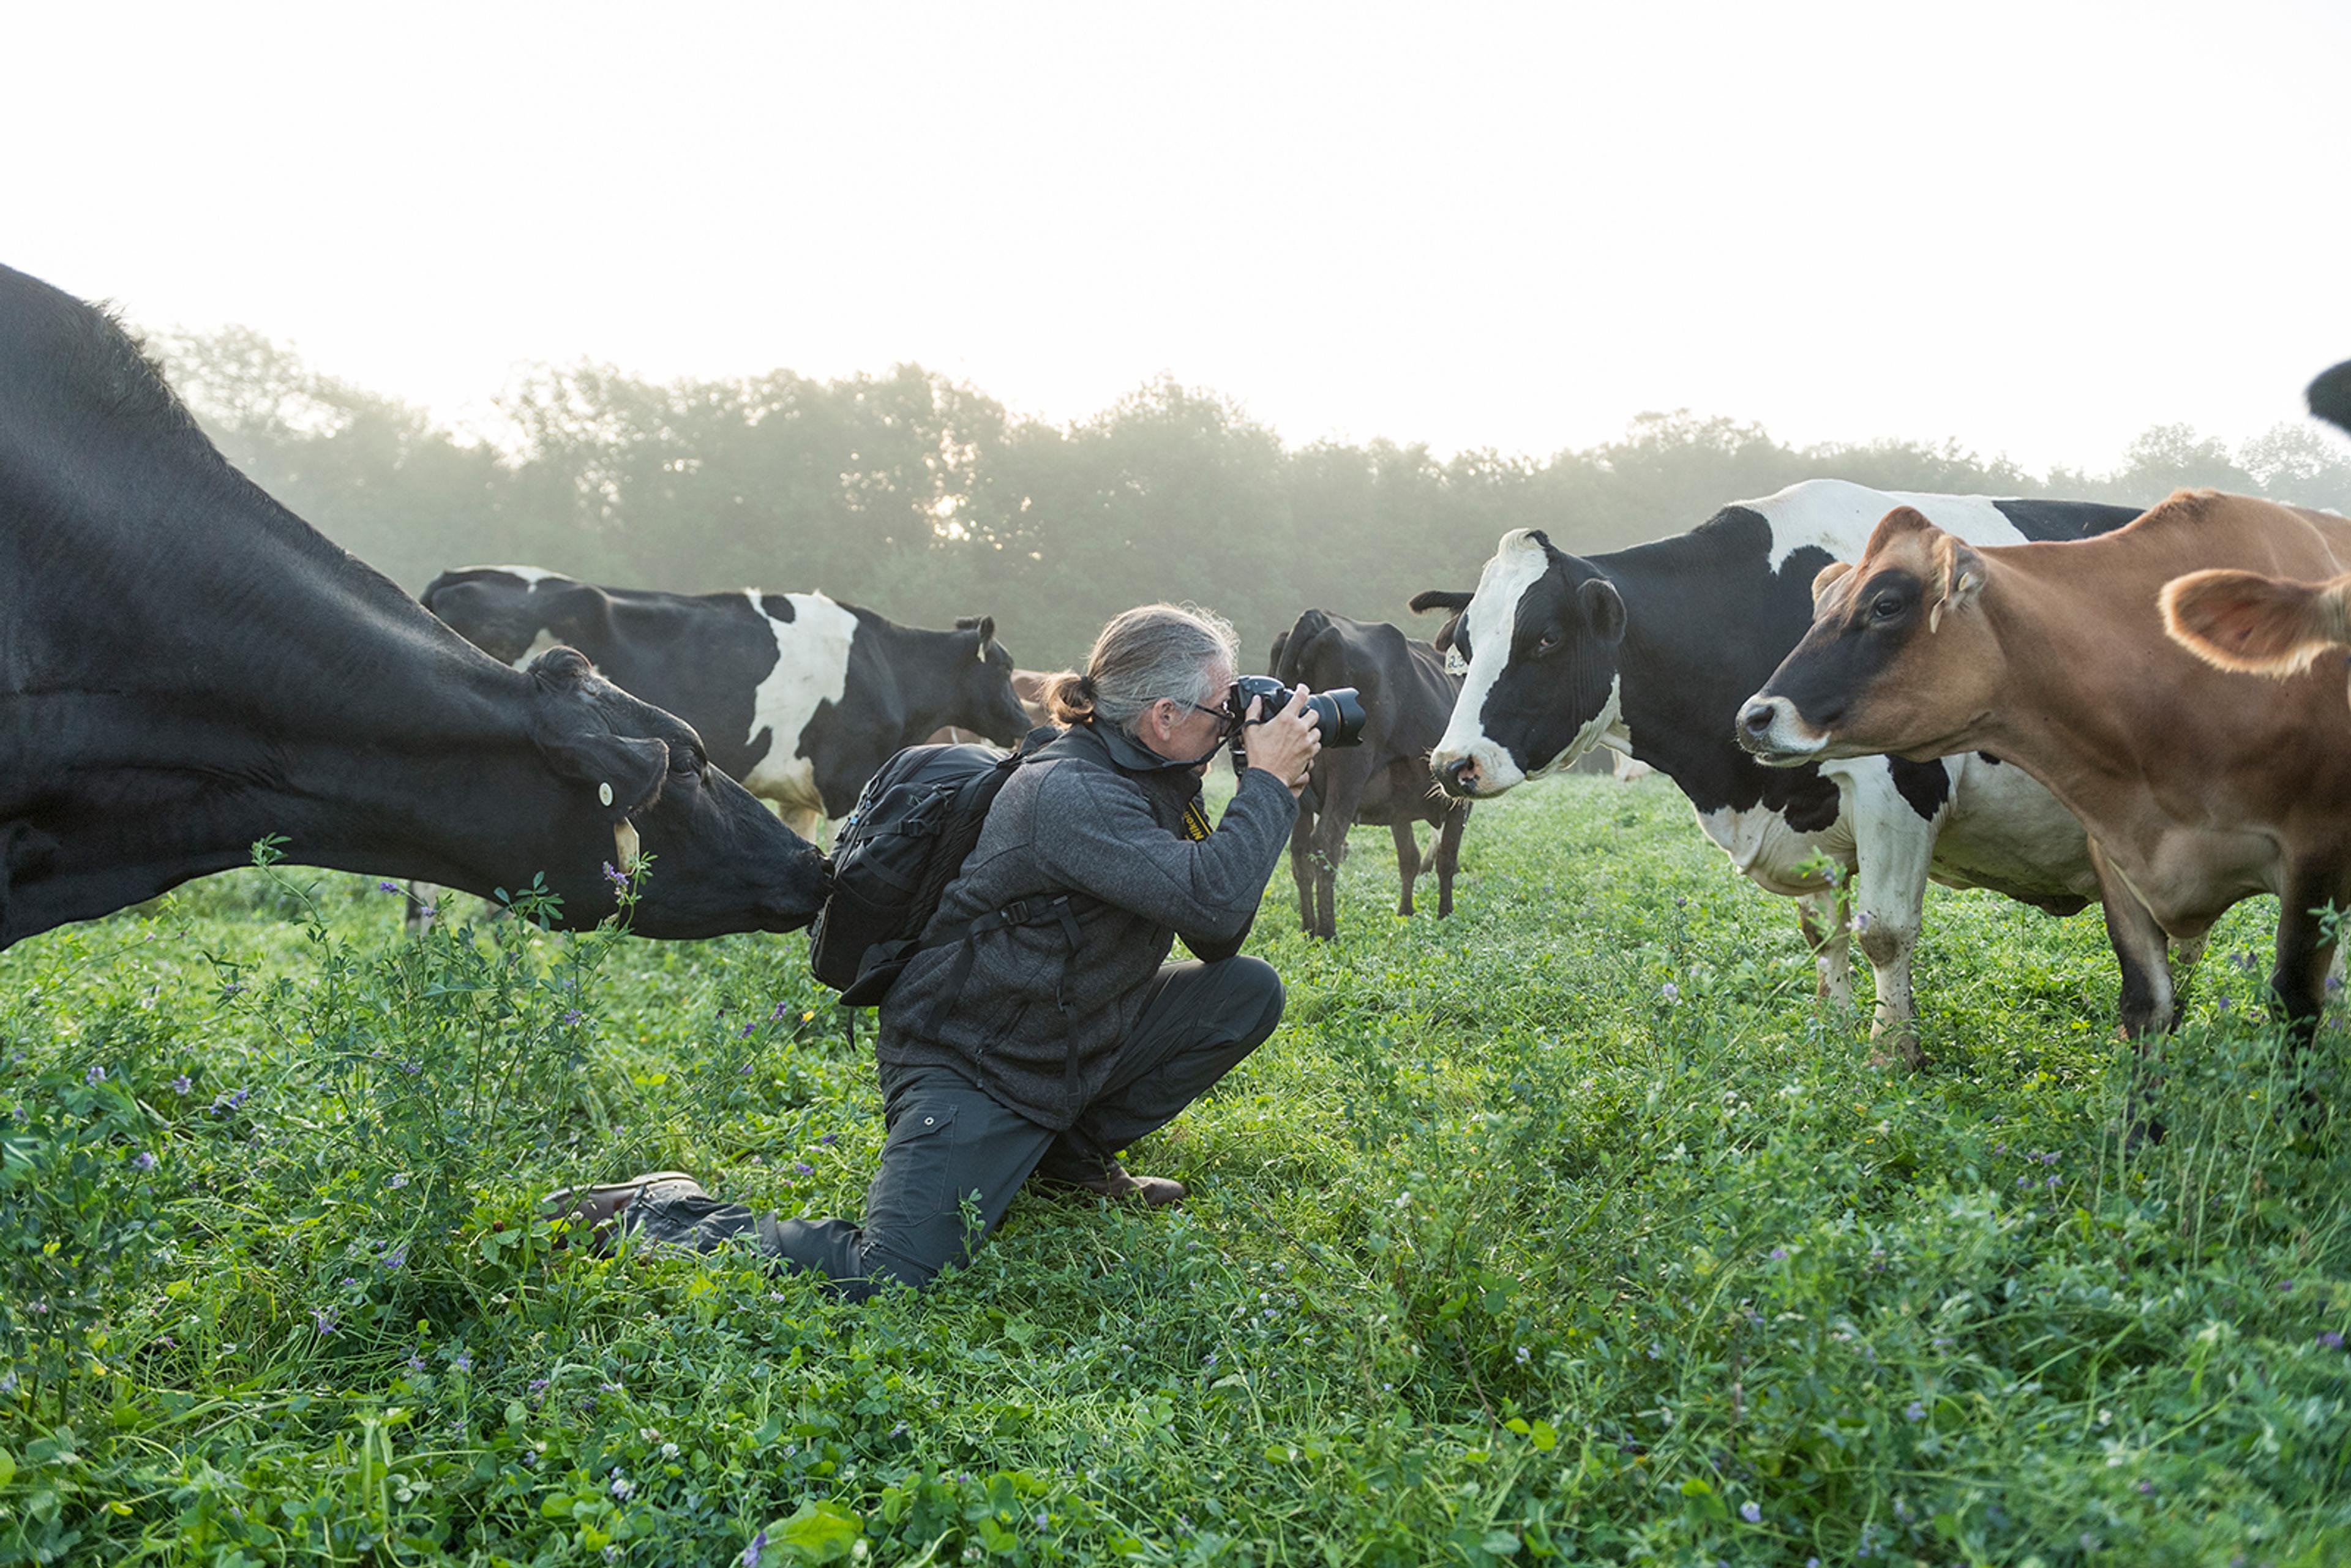 A curious cow sniffs at the photographer's backpack while he's taking a picture in a different direction.